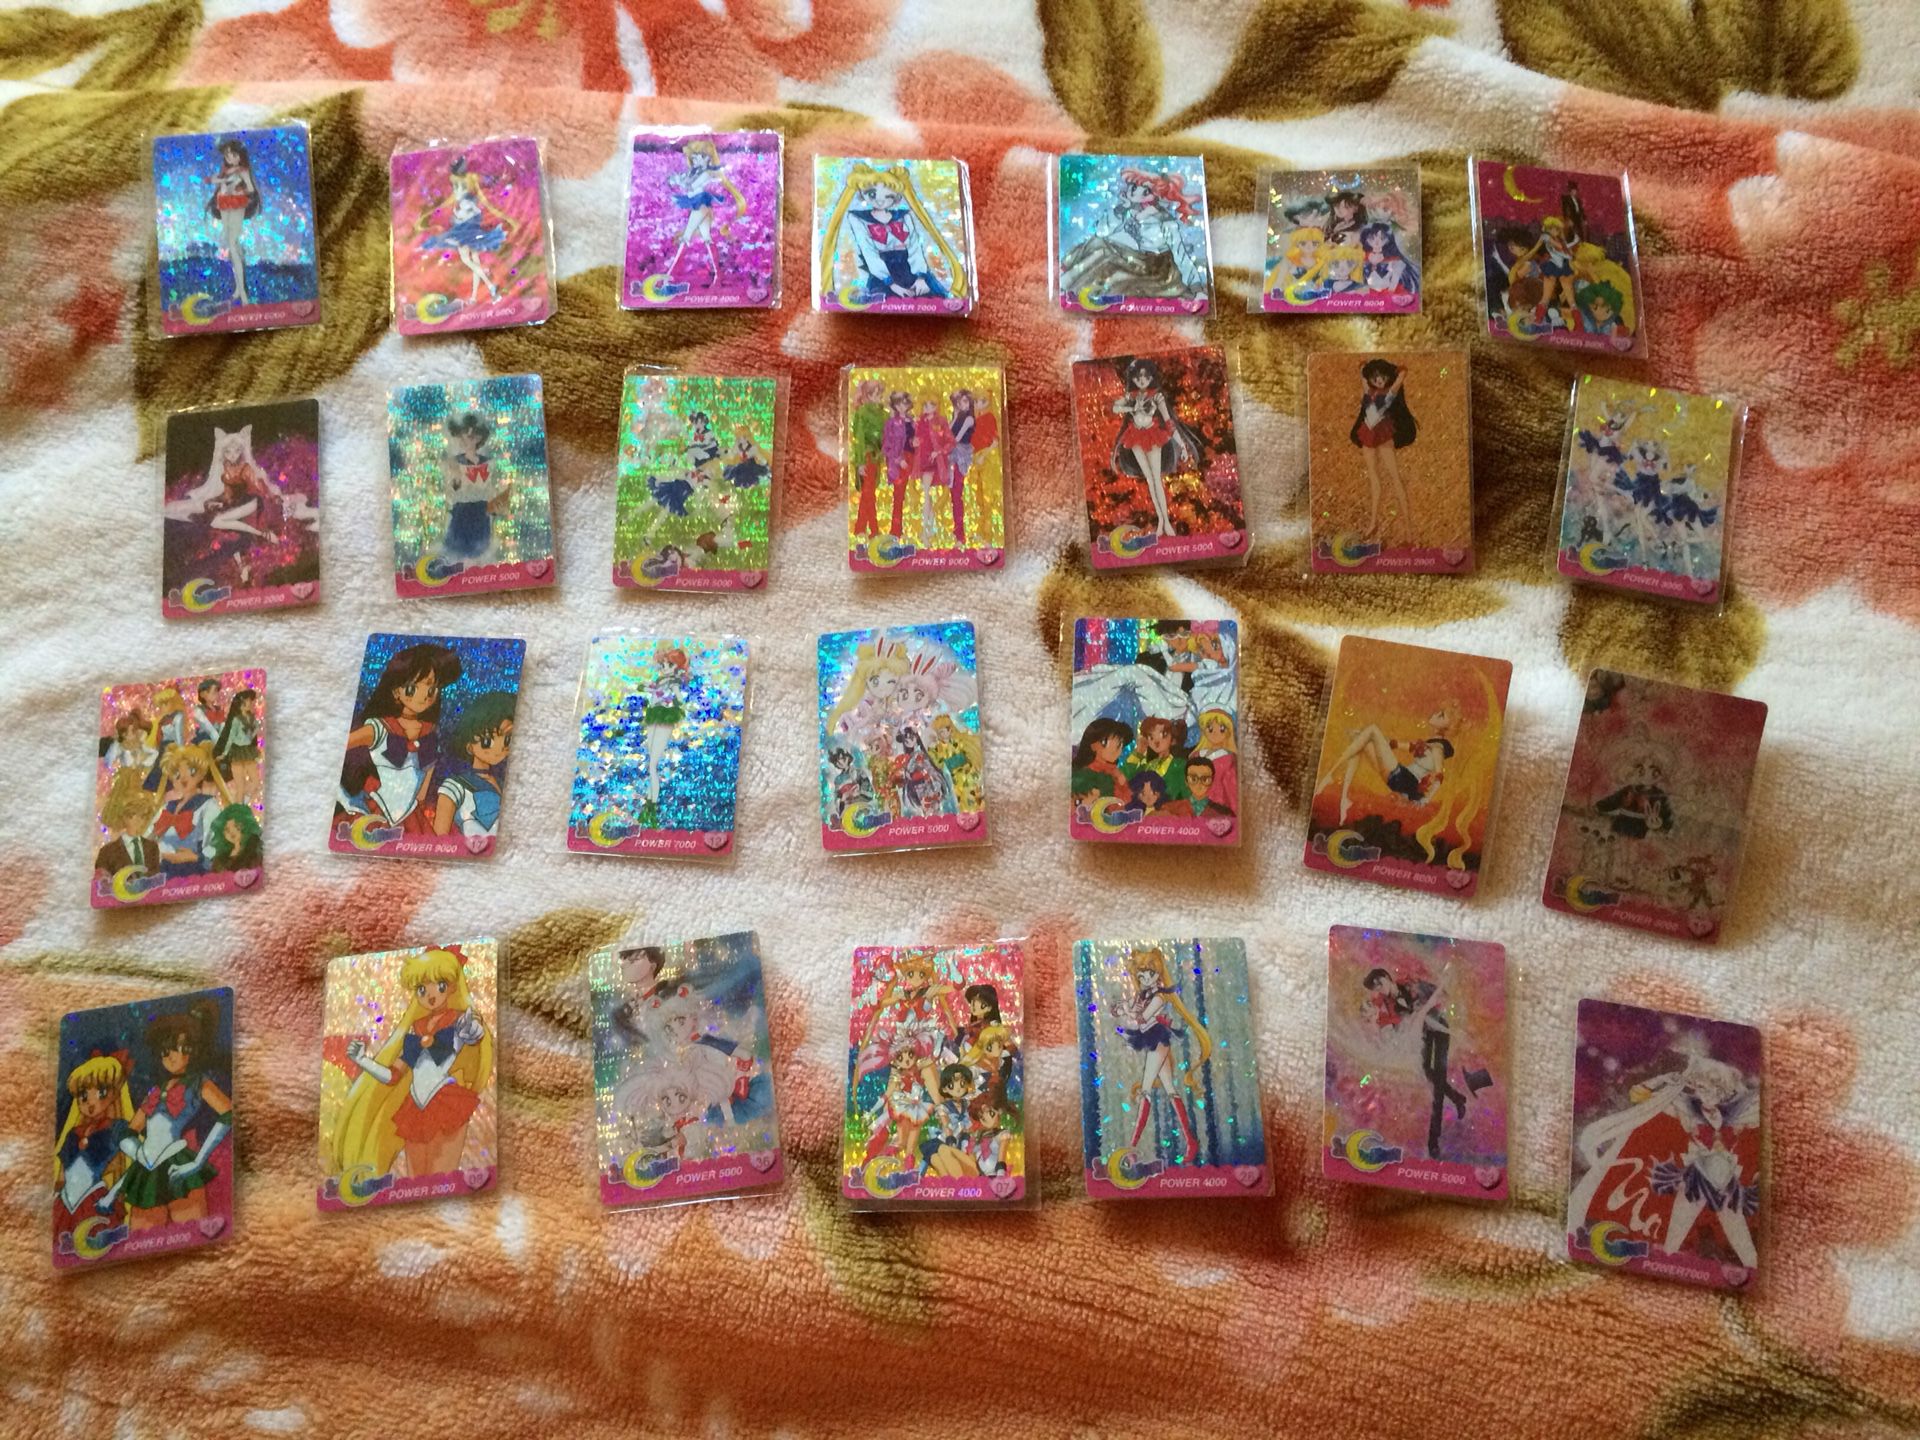 Sailor moon special edition cards wrapped in plastic